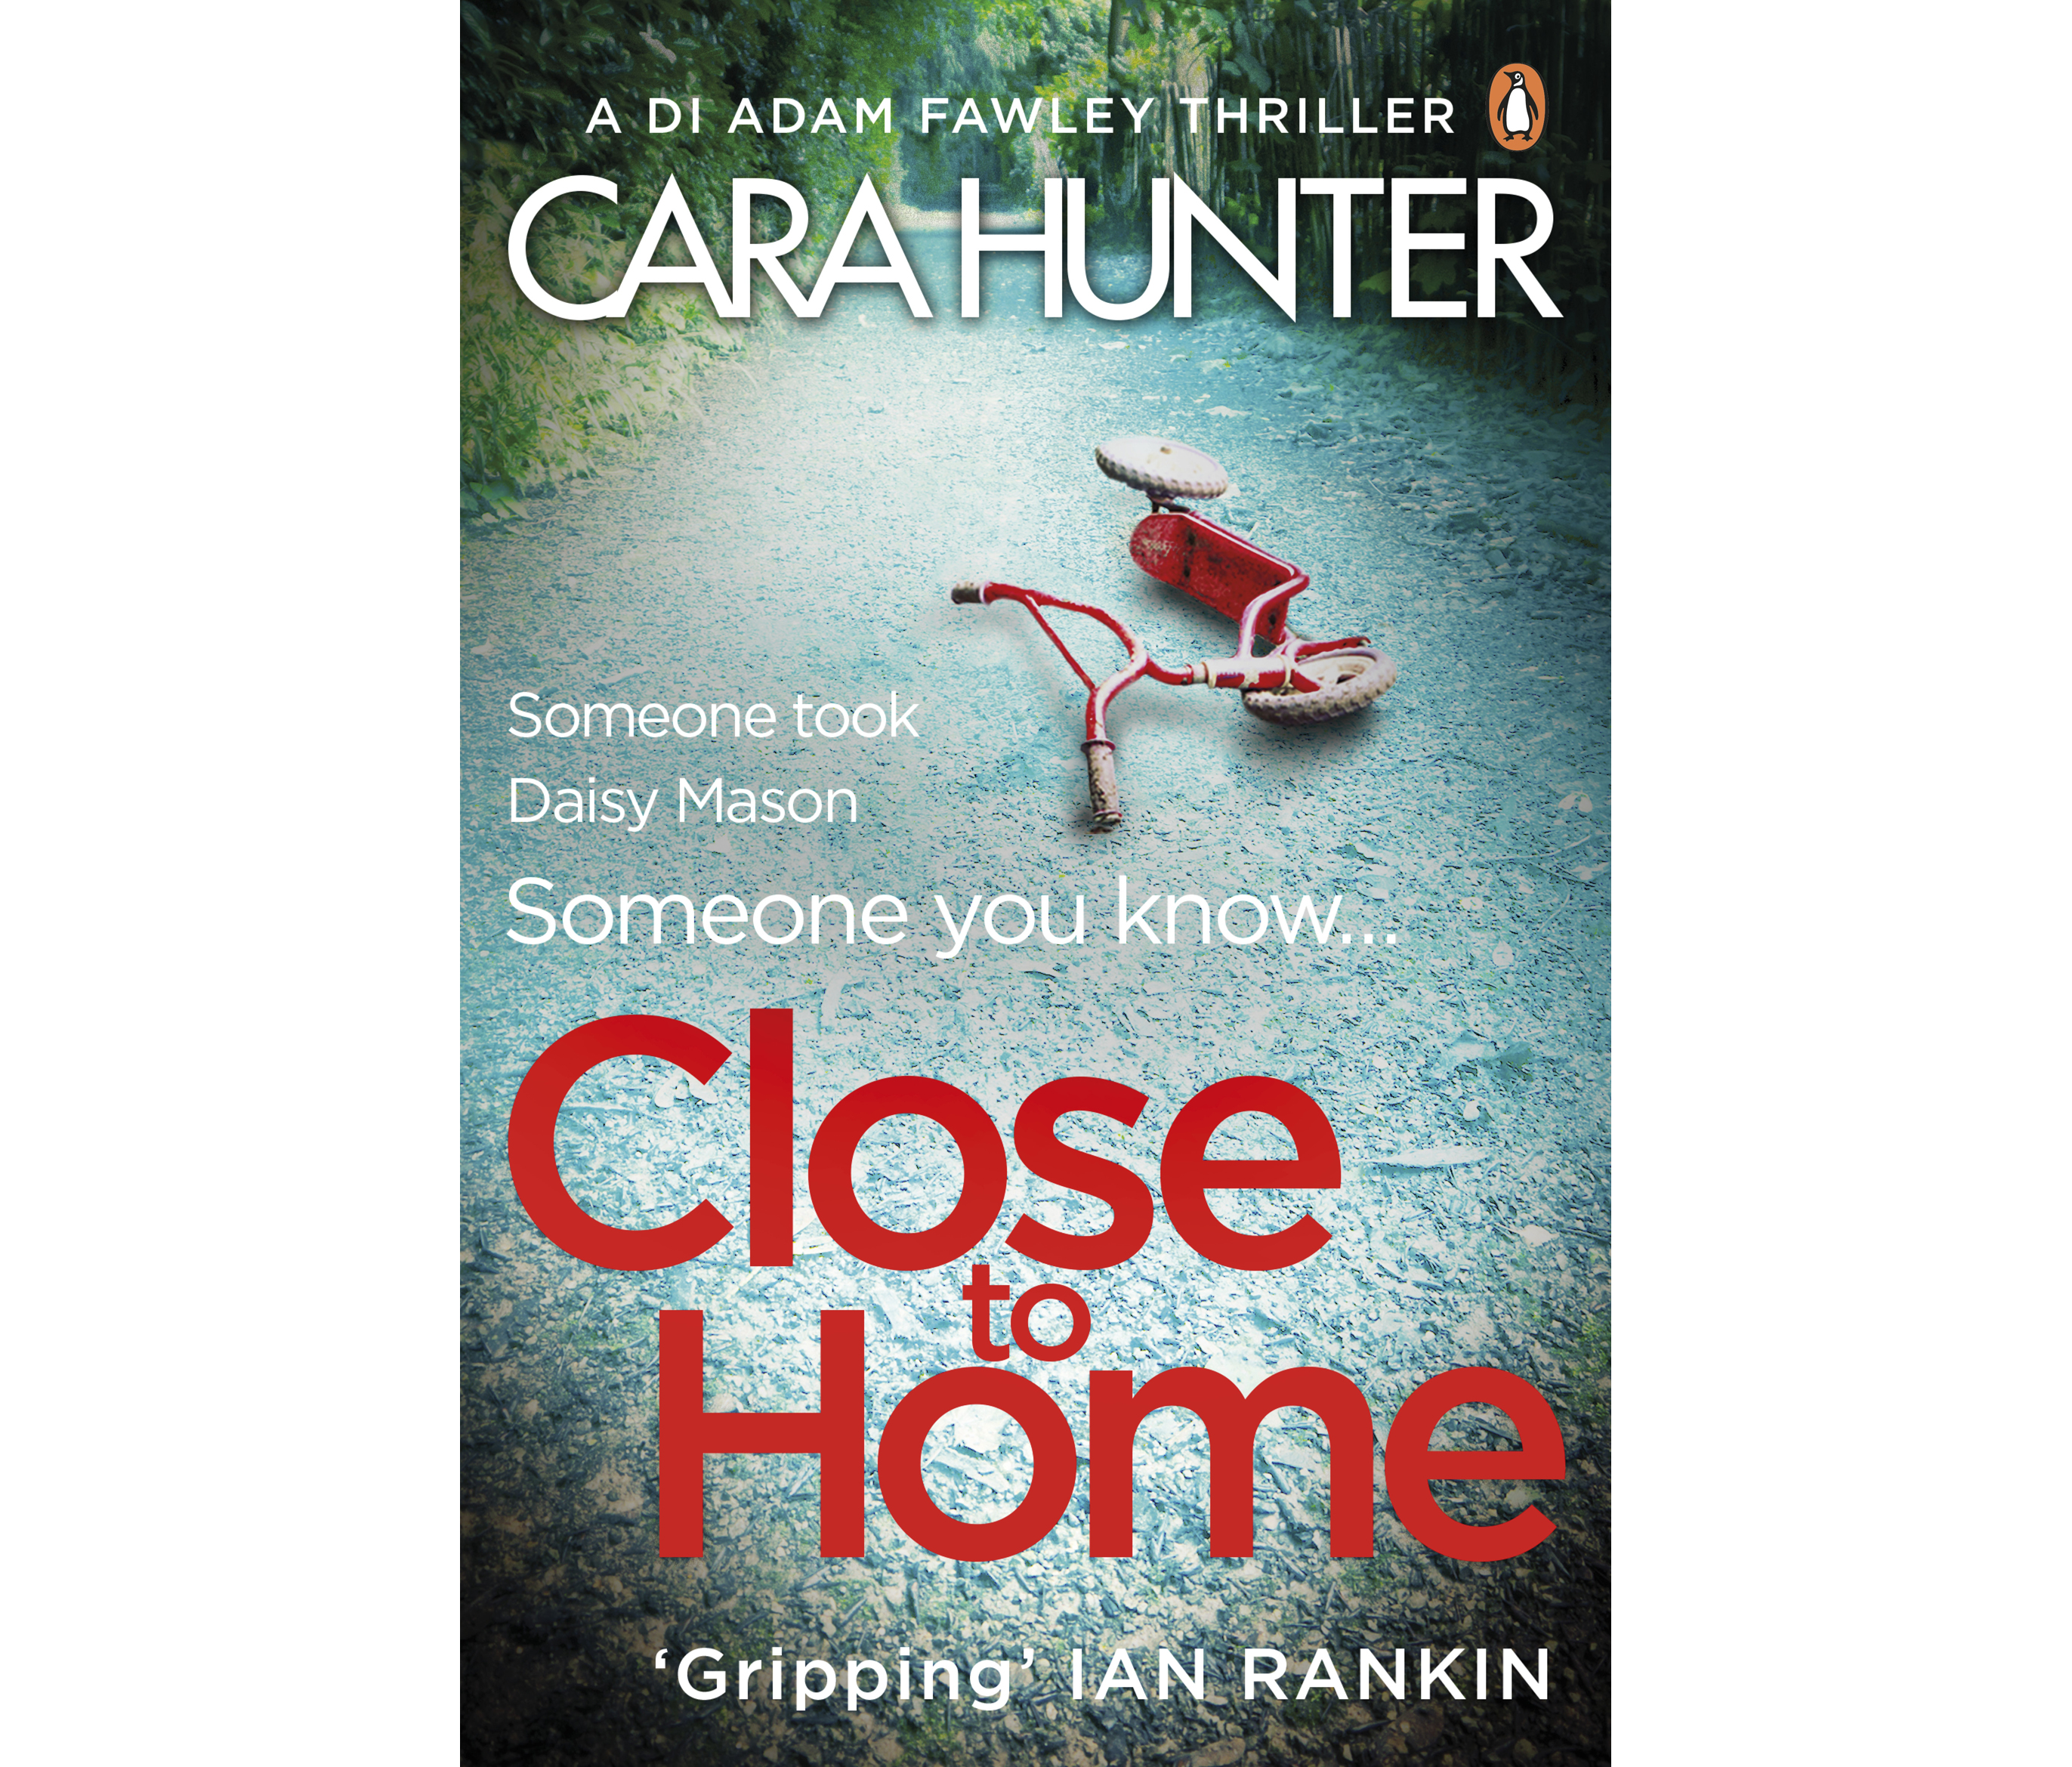 Close To Home by Cara Hunter (Penguin/PA)